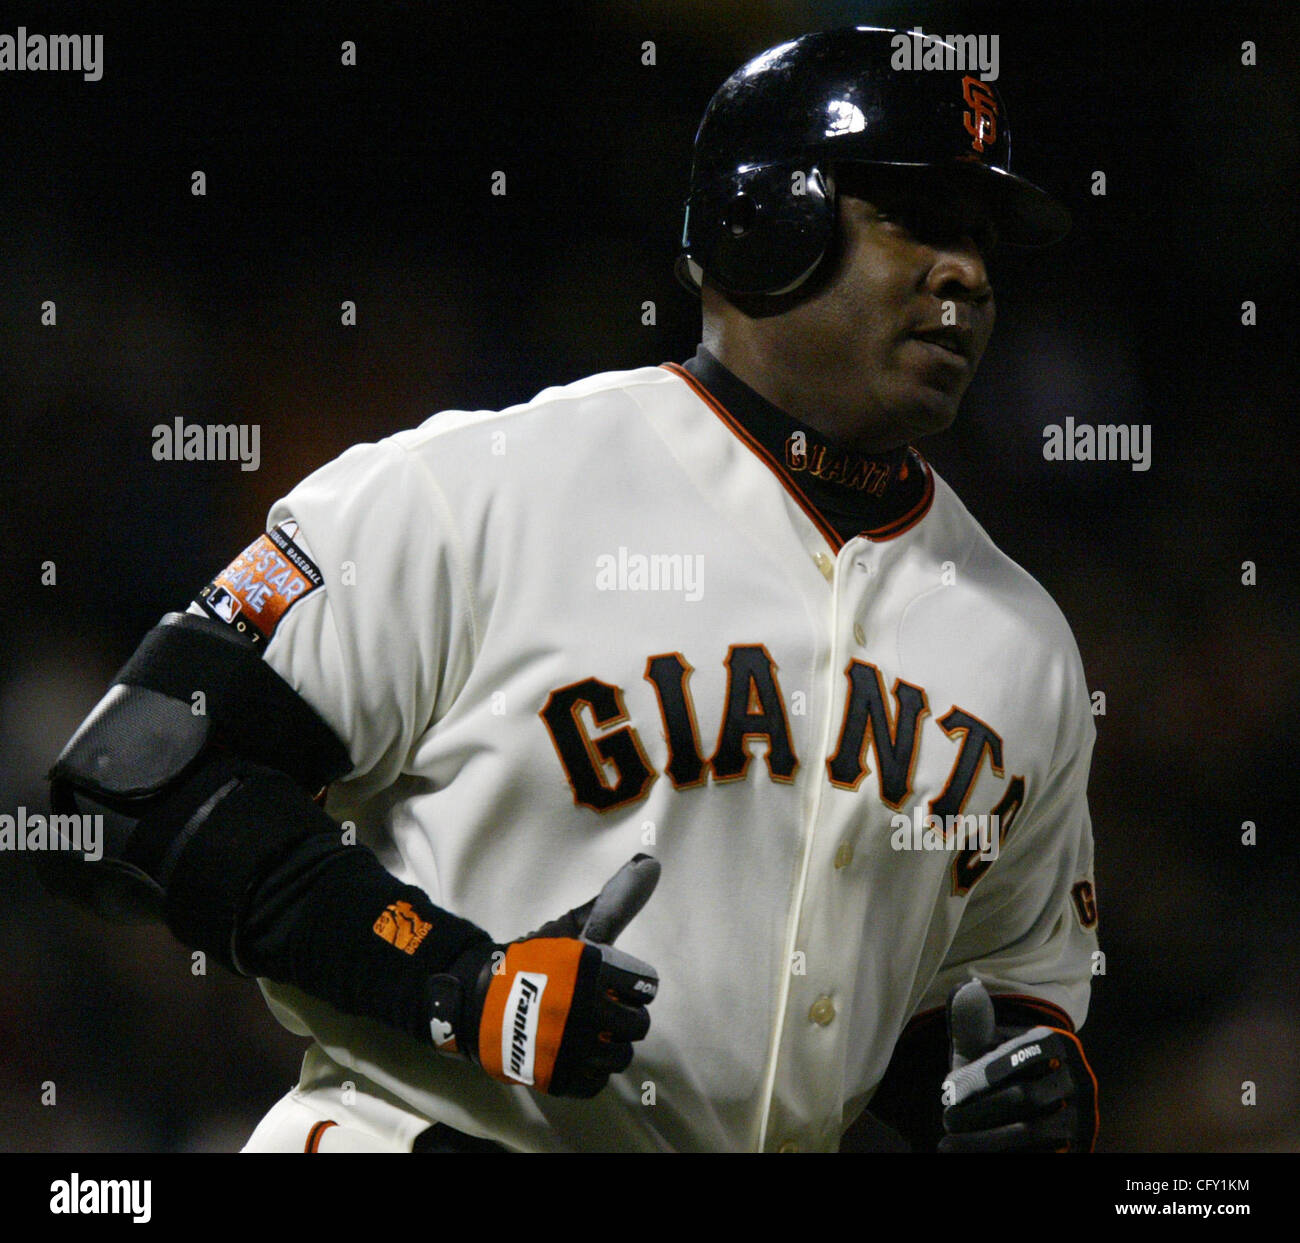 SF Giants' Barry Bonds heads to first base after hitting number 743 in the  4th inning of their Wednesday night game against the Colorado Rockies at  AT&T Park in San Francisco, Calif. (